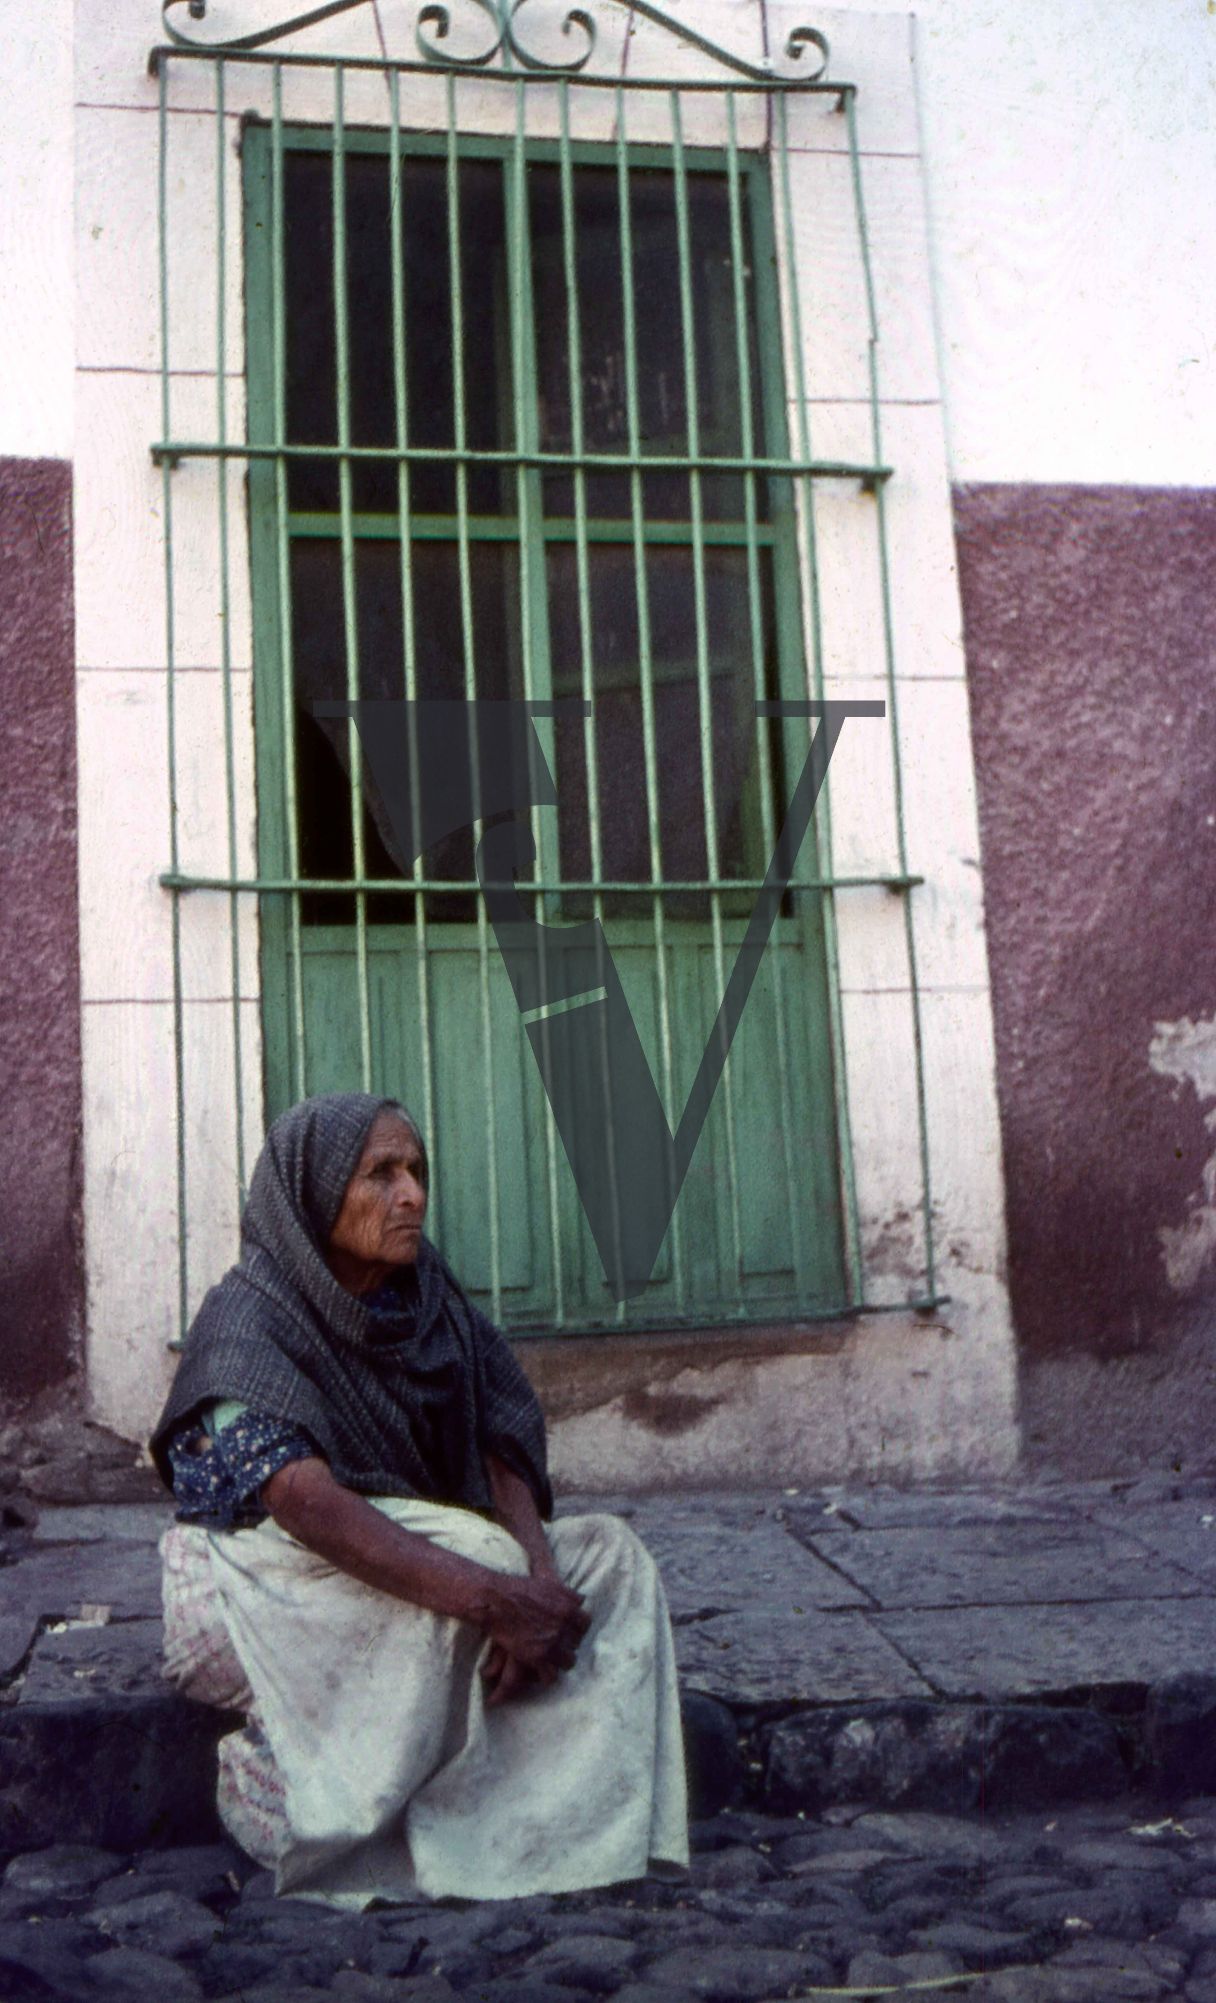 Mexico, Woman in shawls on pavement in front of green winow.